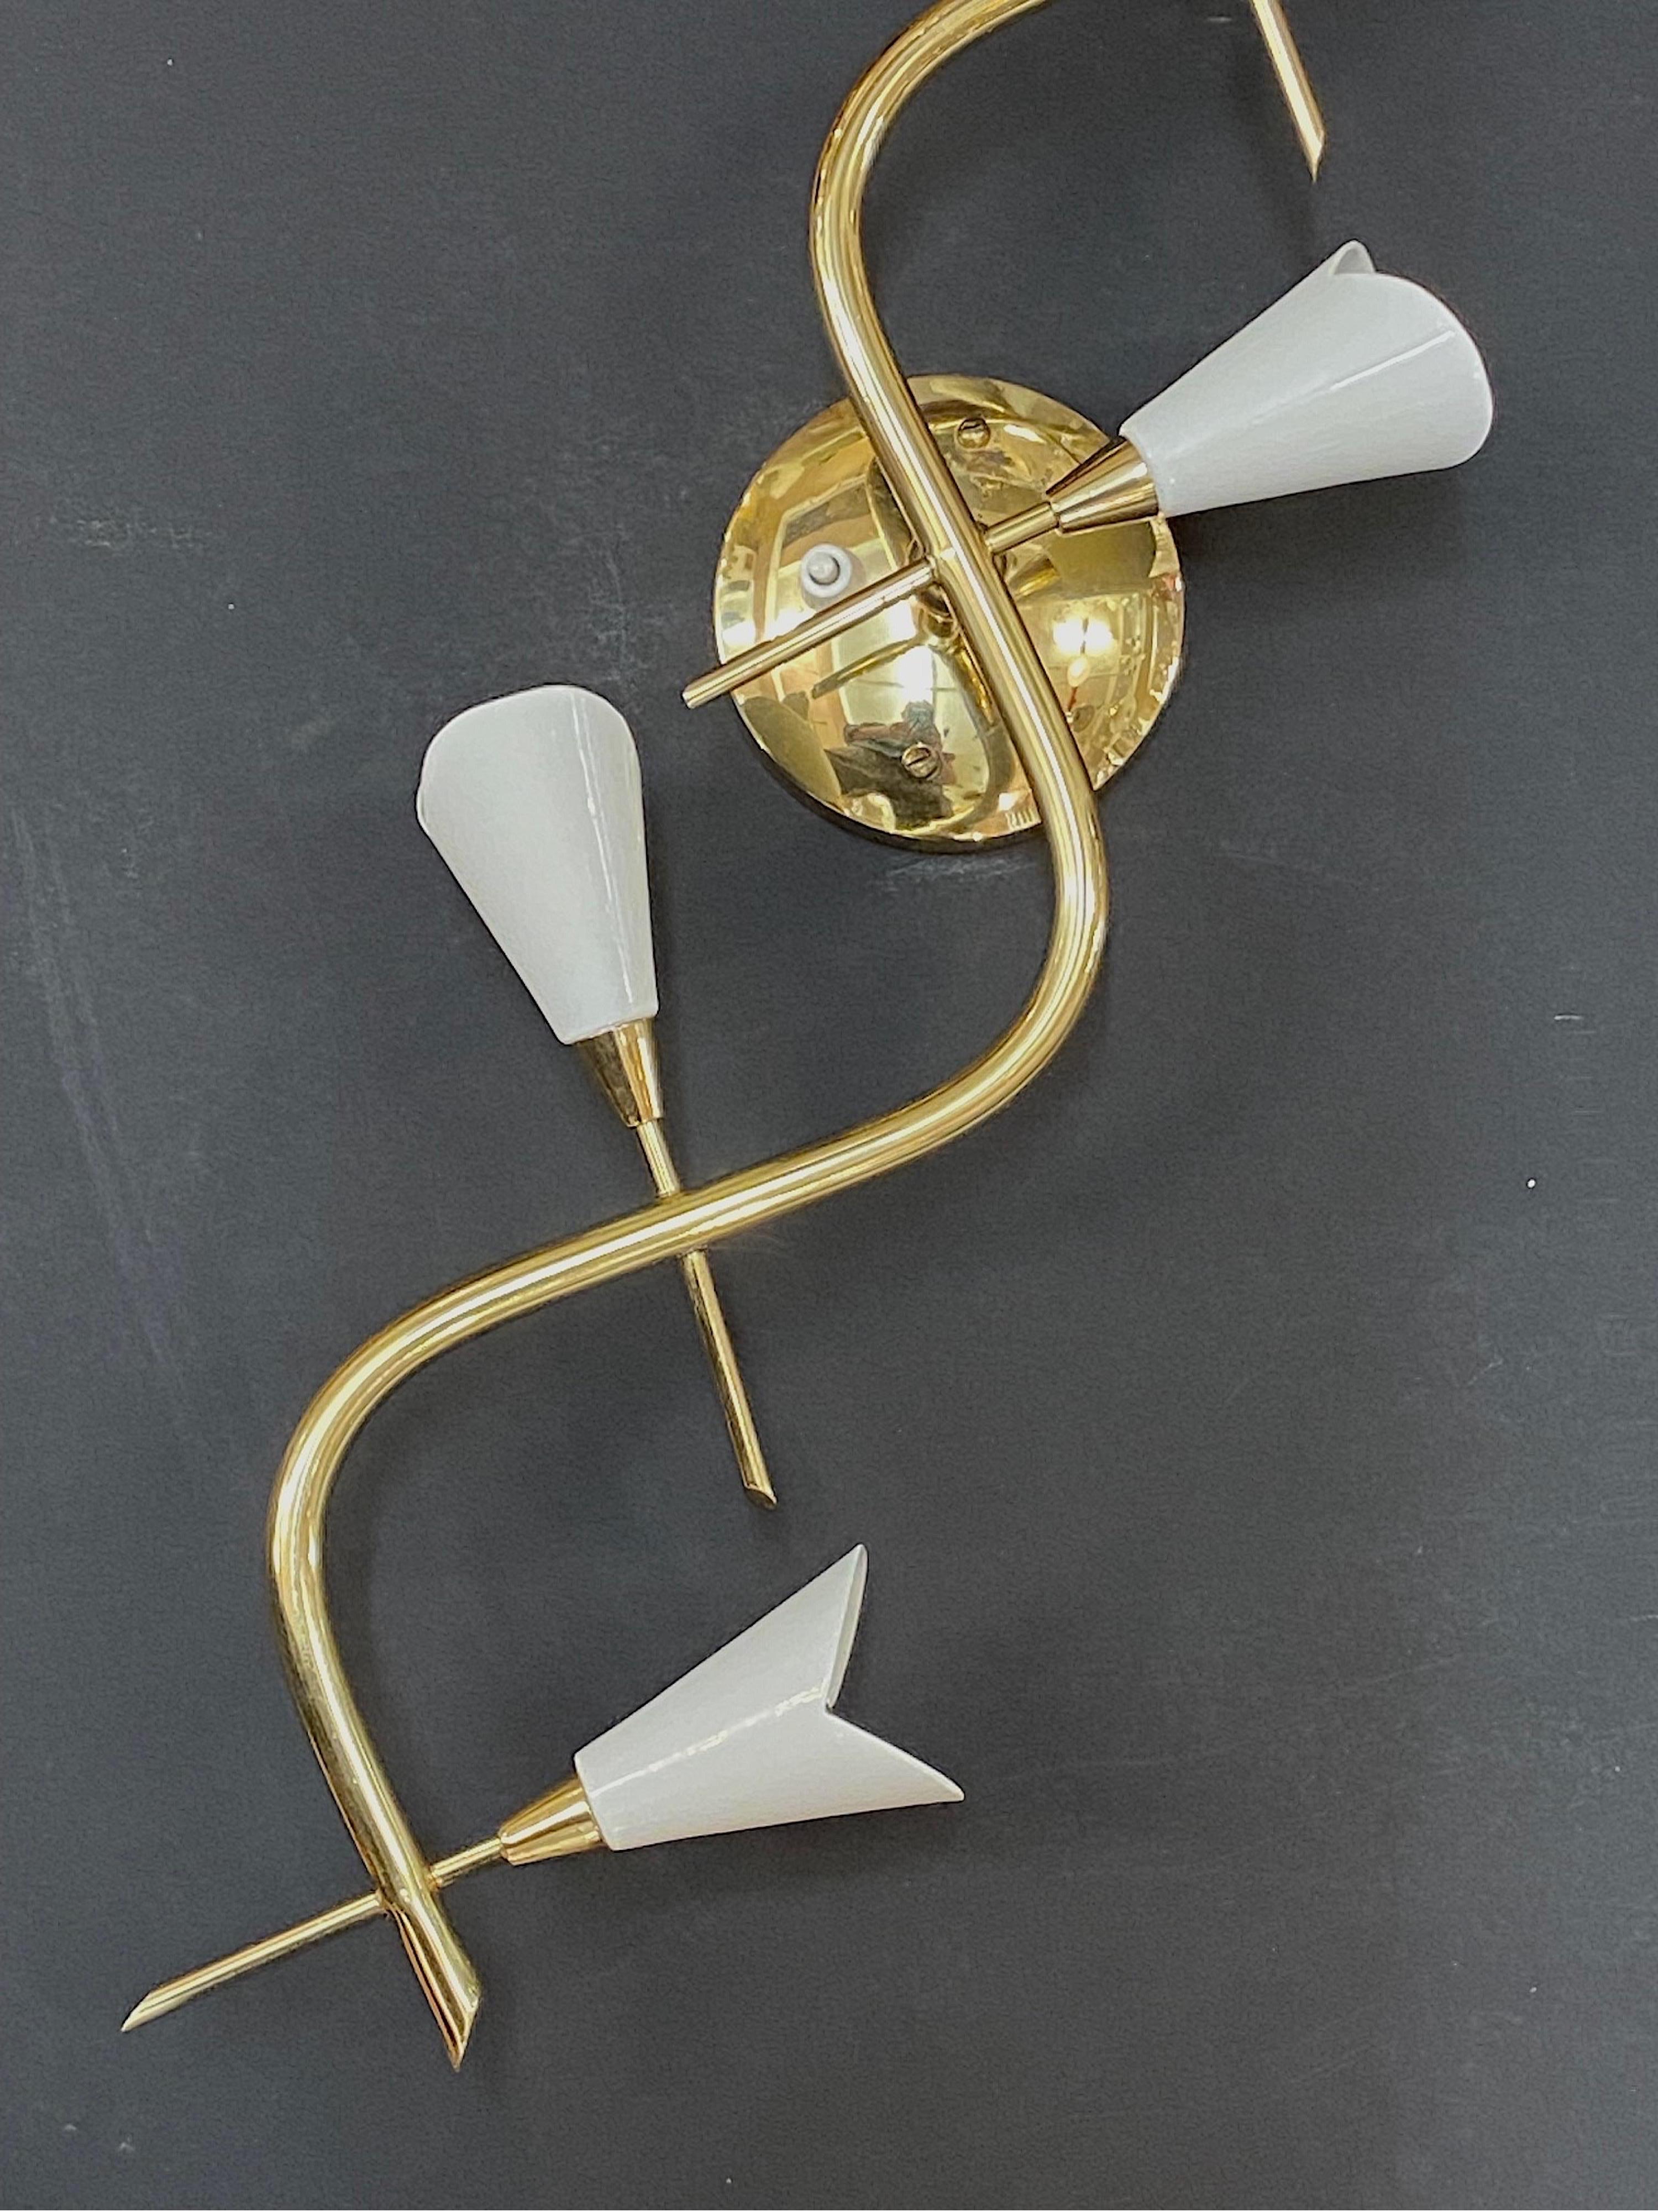 Mid-20th Century Italian 1950s Brass and White Enamel 5 Light Sconce / Wall Light For Sale